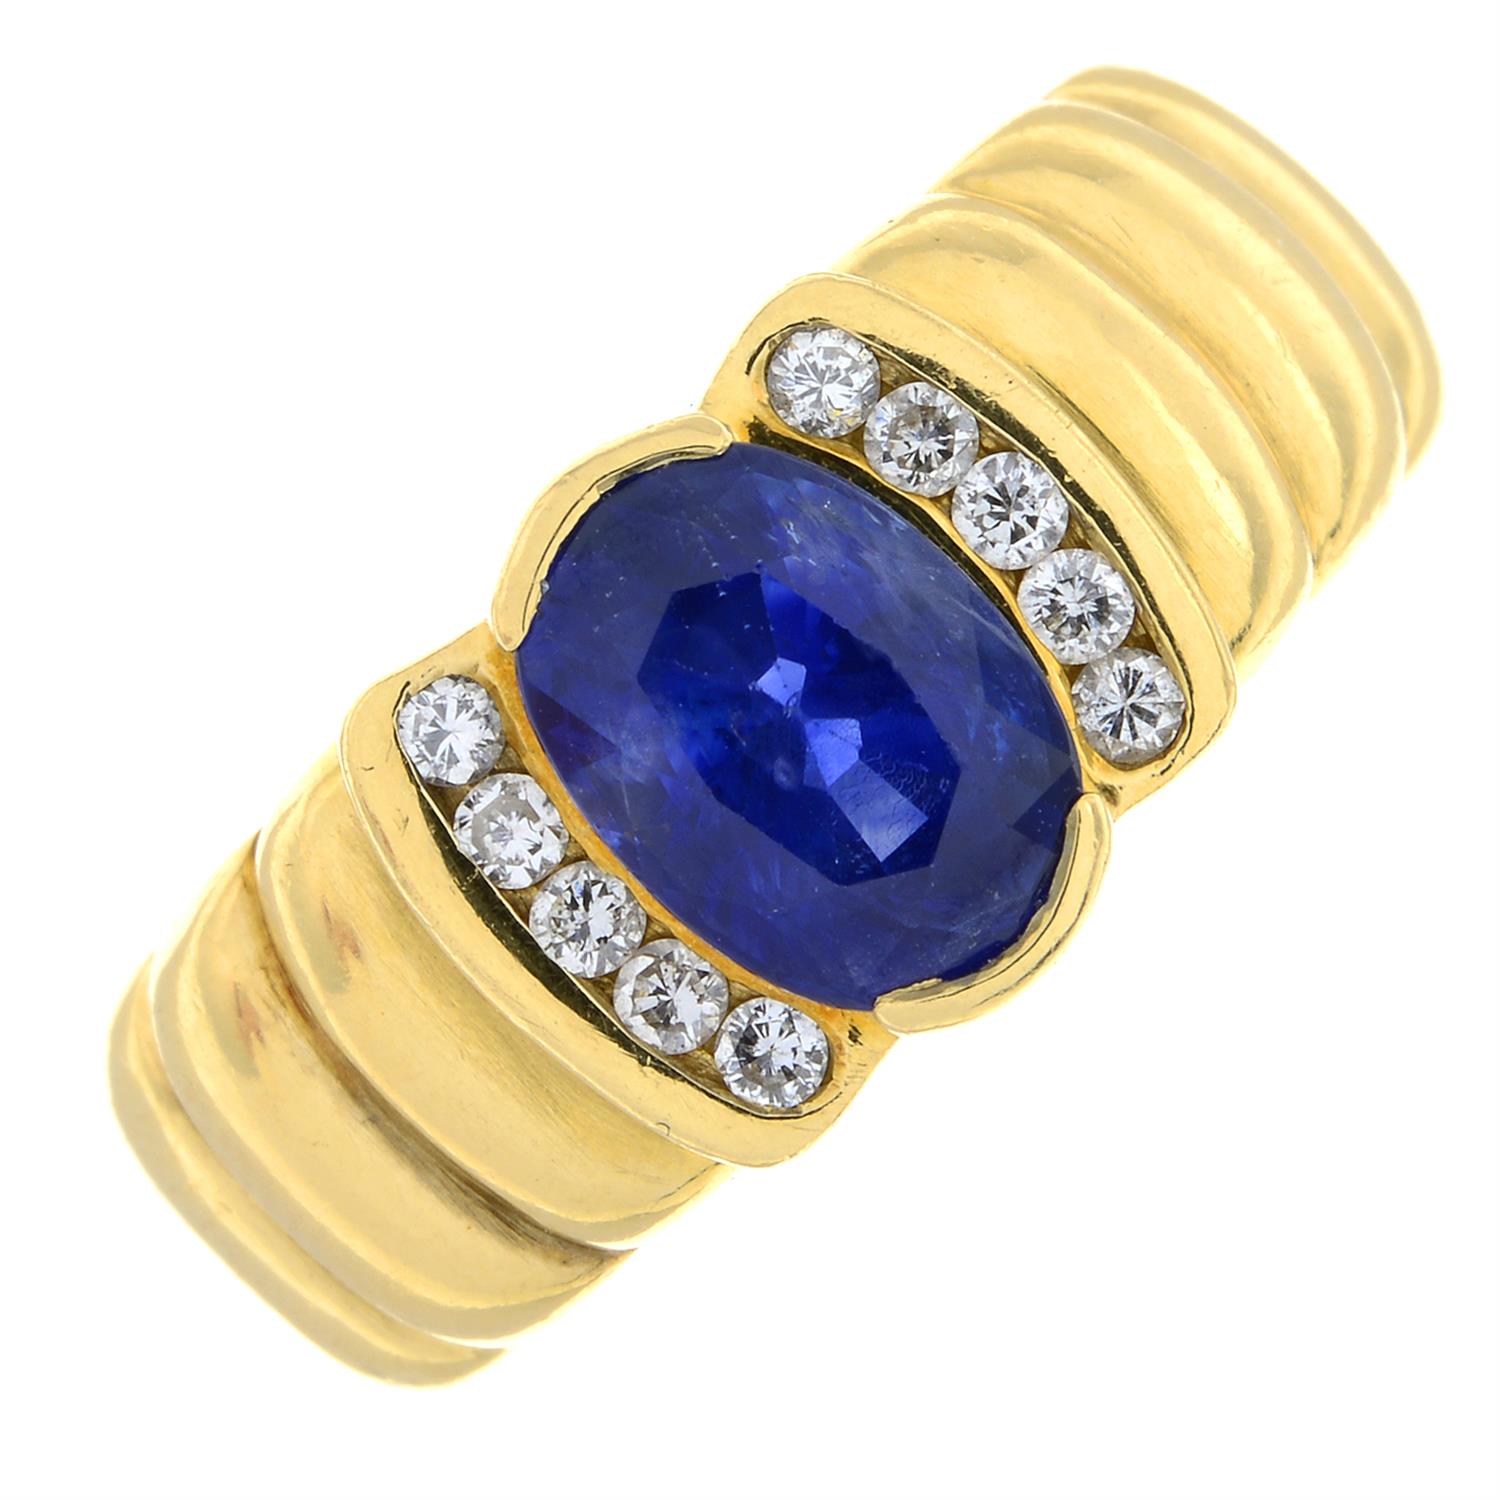 18ct gold sapphire and diamond ring - Image 2 of 5